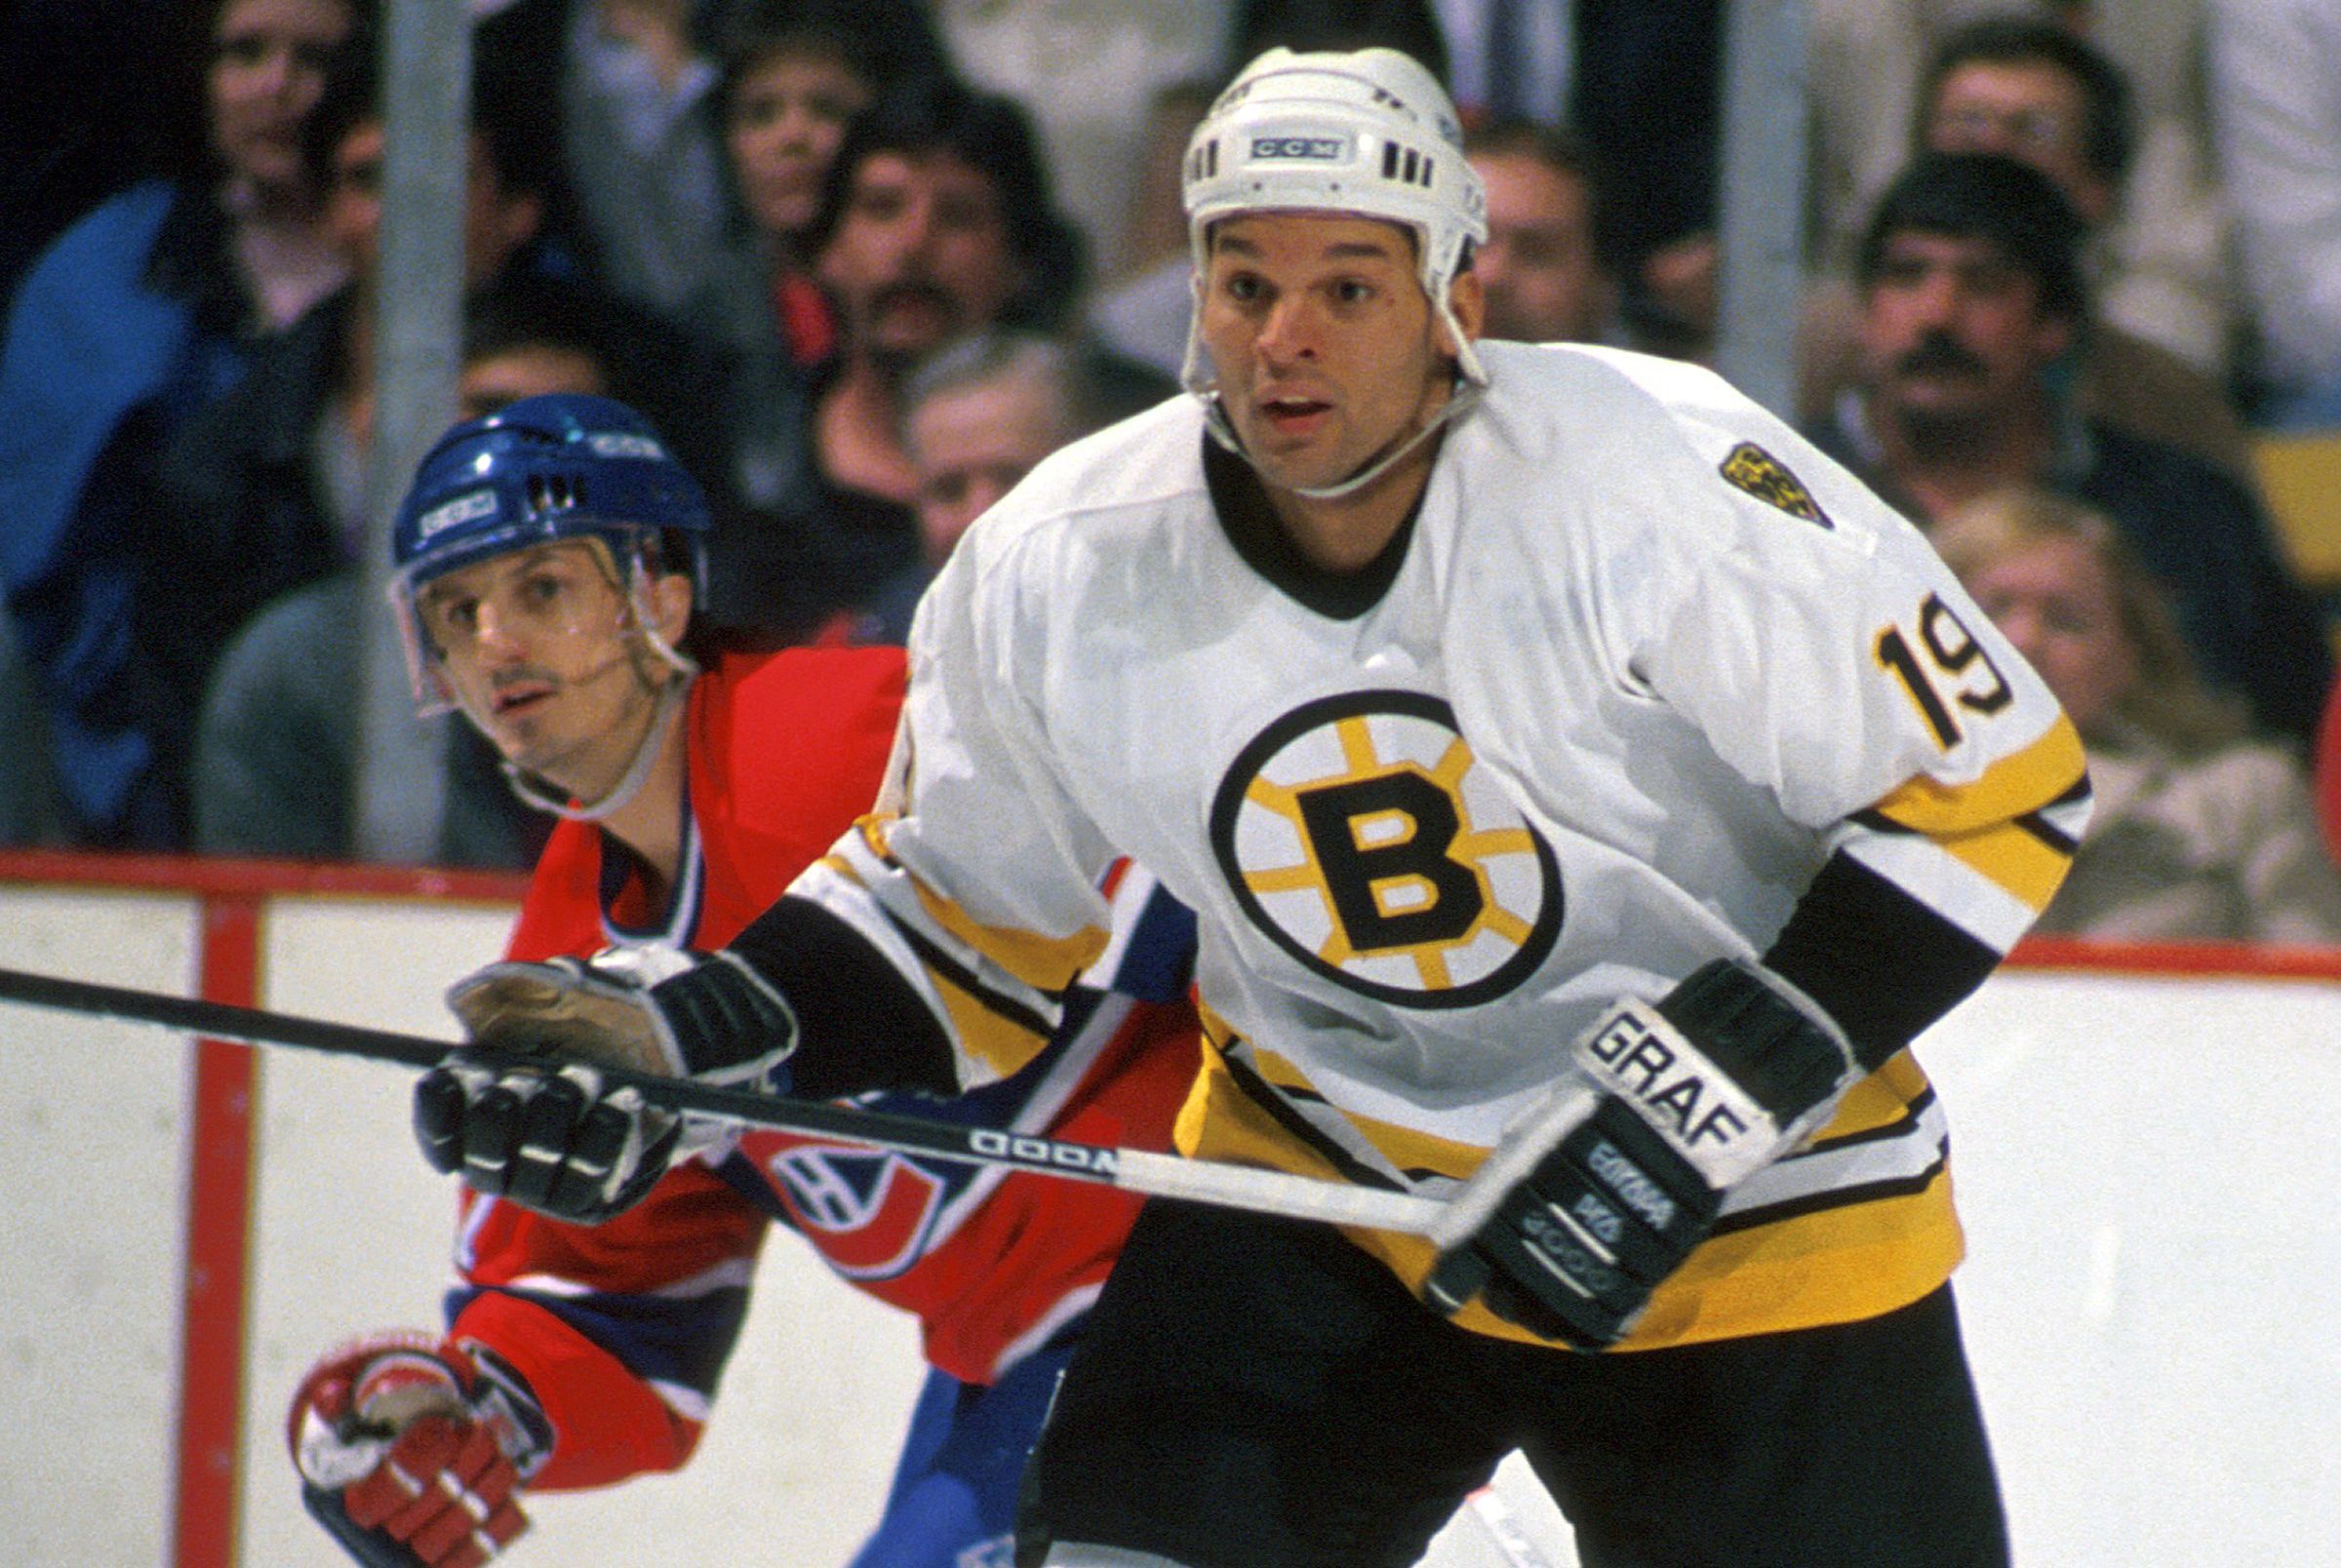 Things need to change': Jarome Iginla opens up about race and his